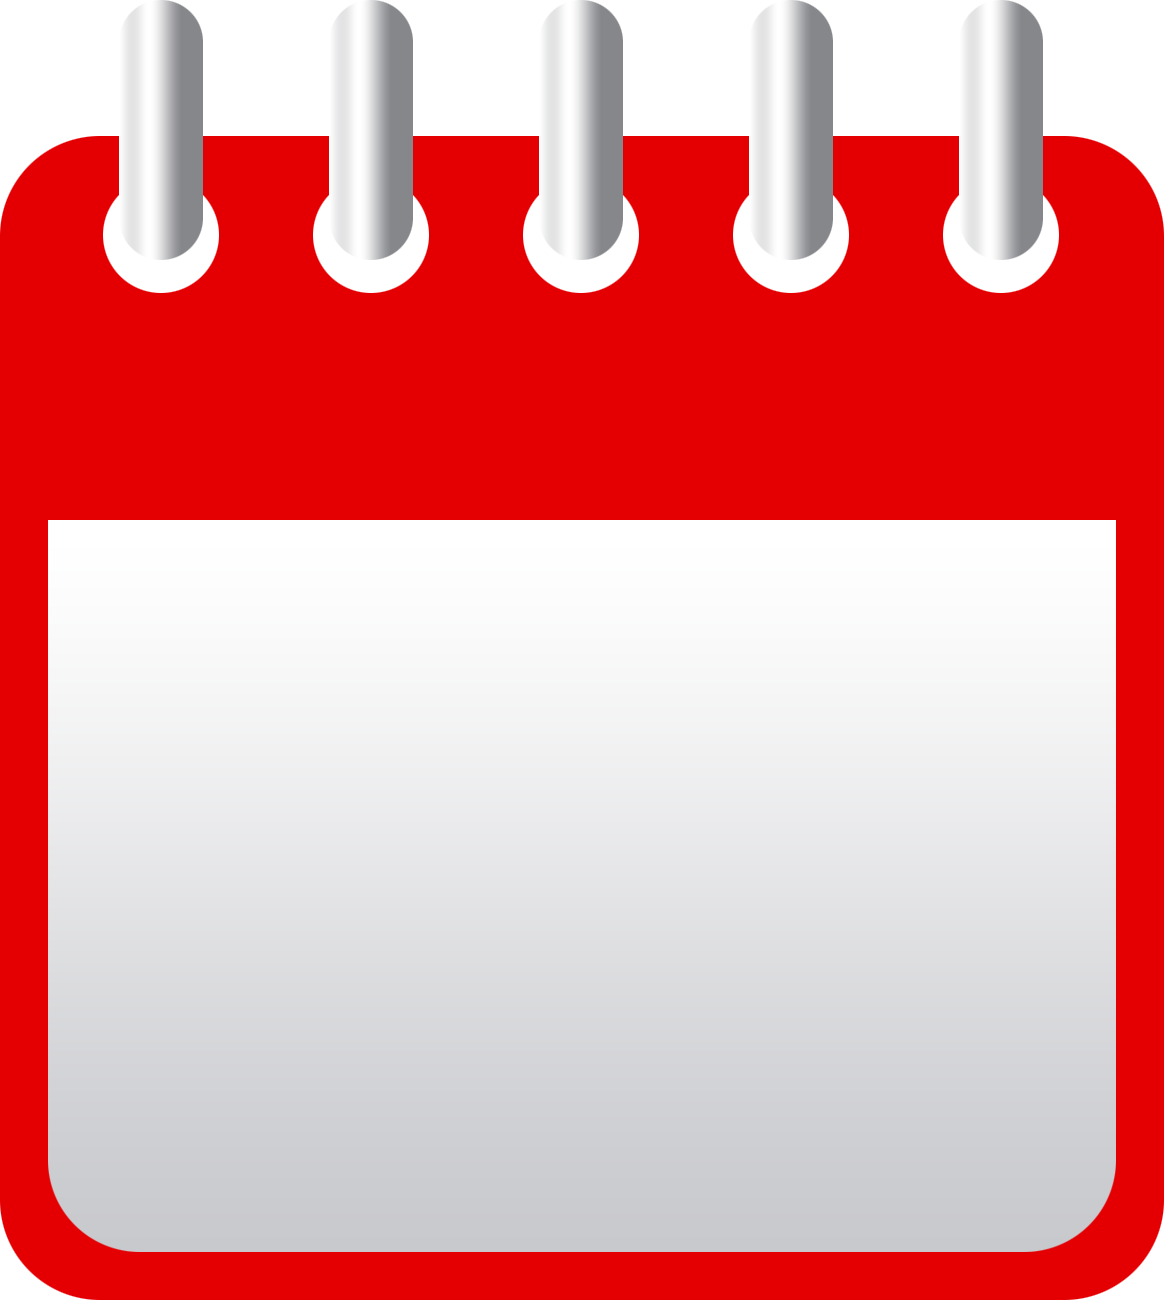 Blank Calendar Icon Png 41273 Free Icons Library